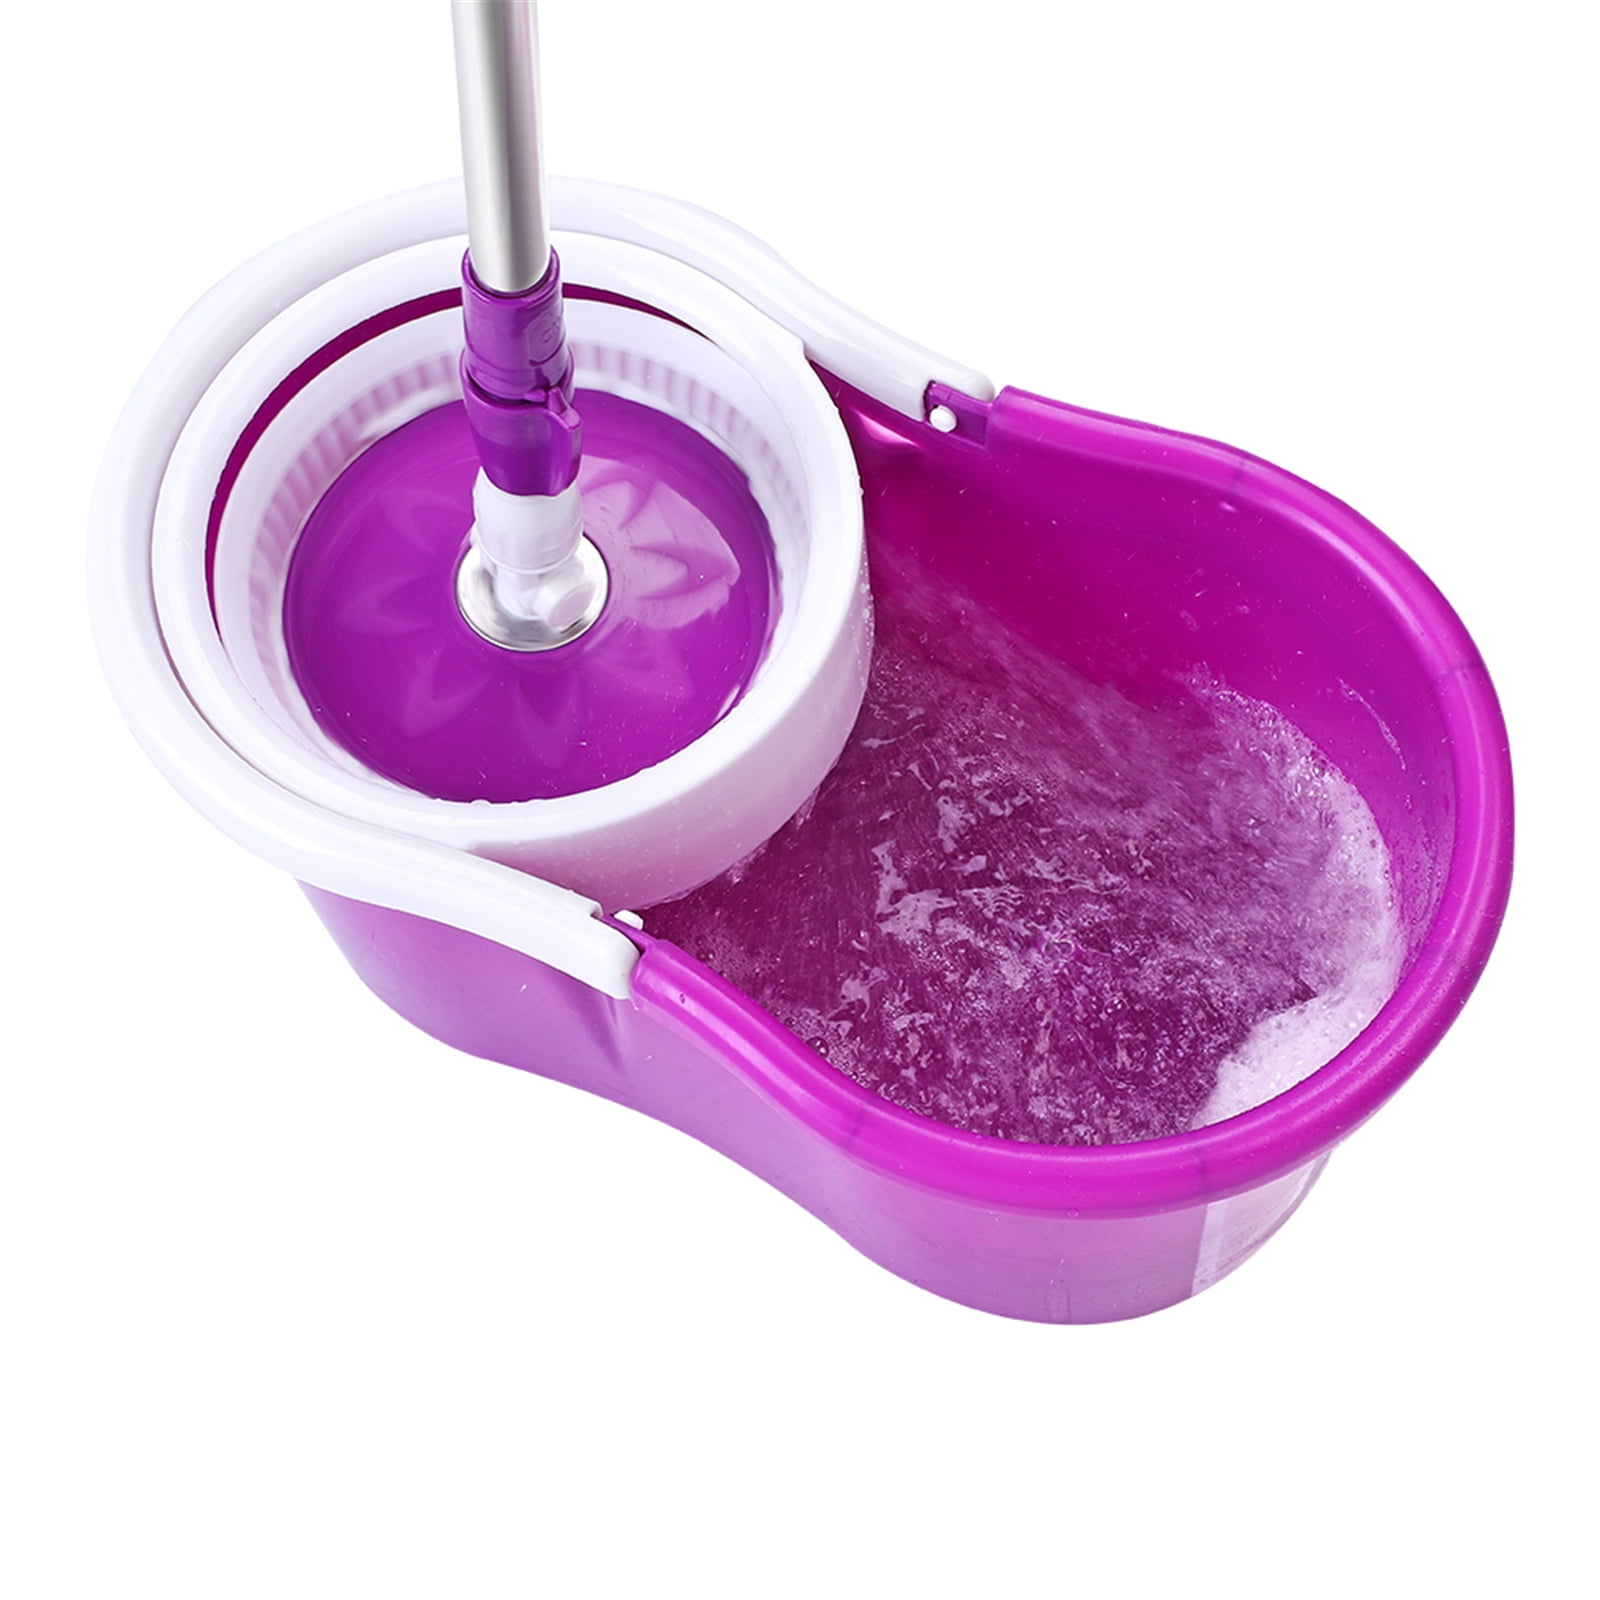 360° ROTATING PLASTIC SPIN MOP BUCKET MICROFIBER DRY WET CLEANING 2 MOP HEADS 